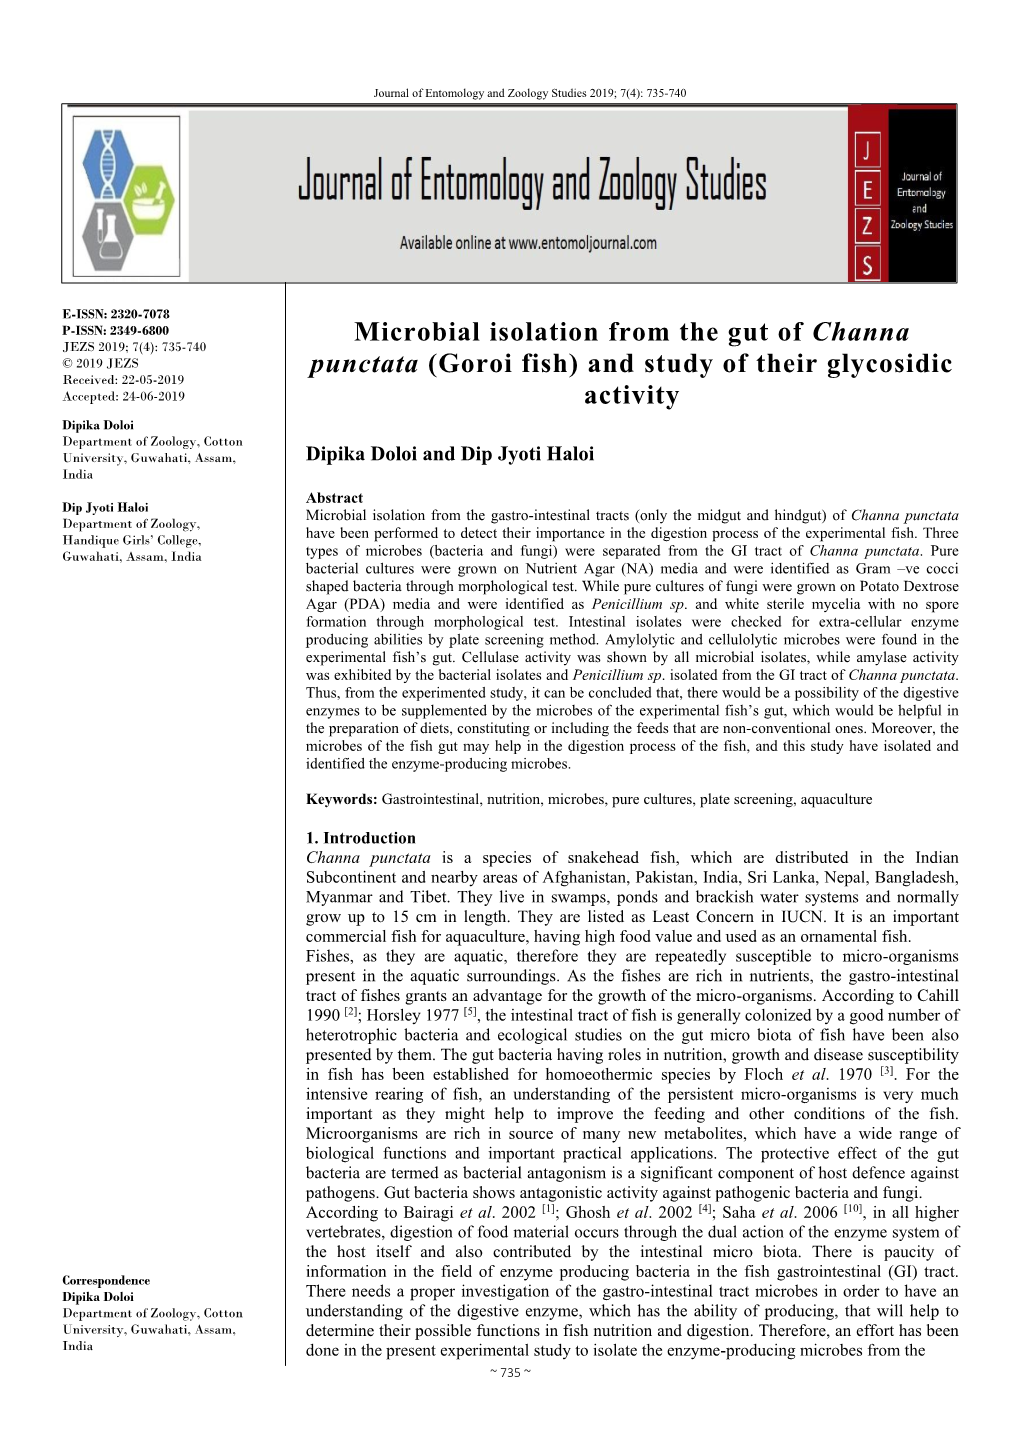 Microbial Isolation from the Gut of Channa Punctata (Goroi Fish) And